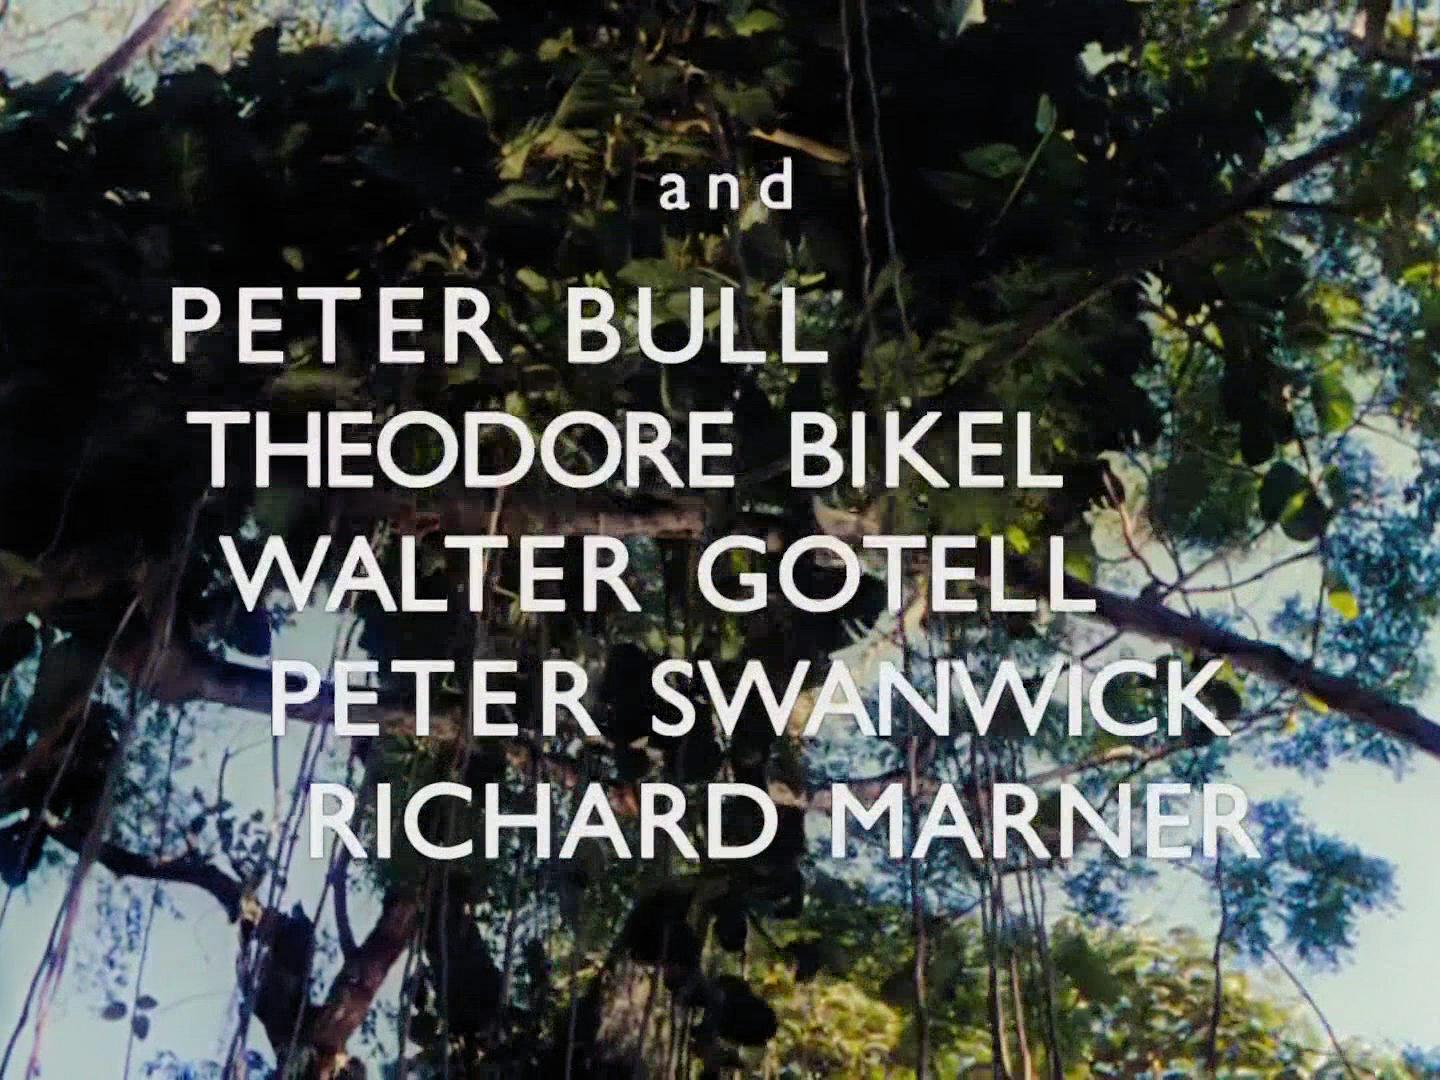 Main title from The African Queen (1951) (5). And Peter Bull, Theodore Bikel, Walter Gotell, Peter Swanwick, Richard Marner